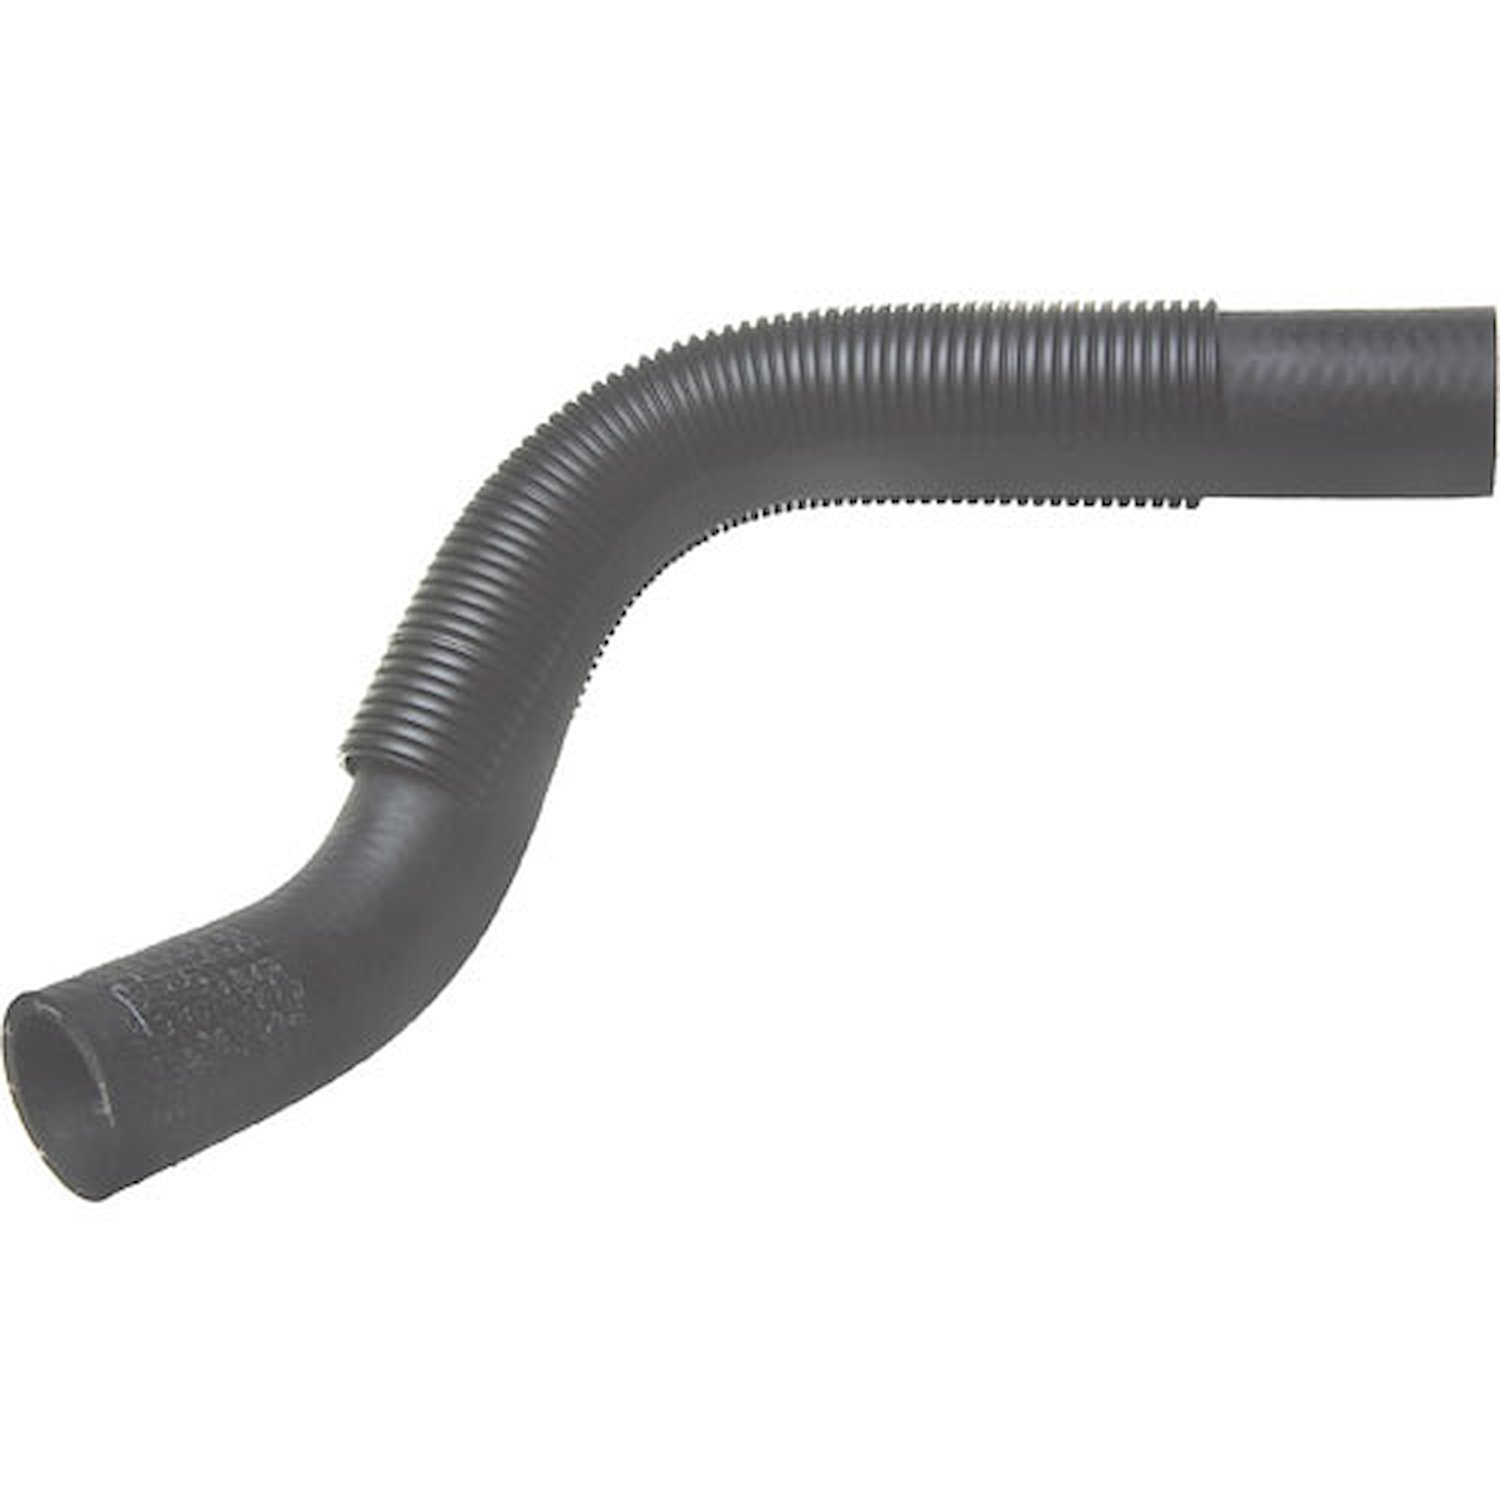 Radiator Coolant Hose [Lower] Fits Select 1999-2014 Cadillac, Chevrolet, GMC